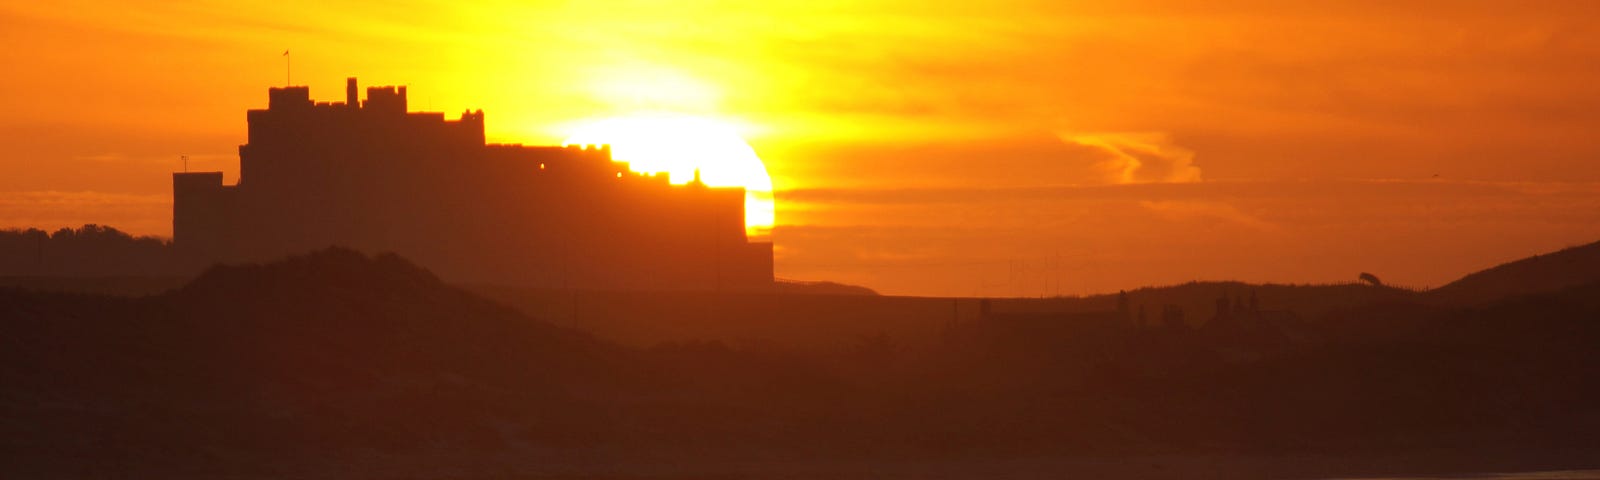 The sun sets behind Bamburgh Castle colouring the sky and sea in brilliant hues of yellow and orange